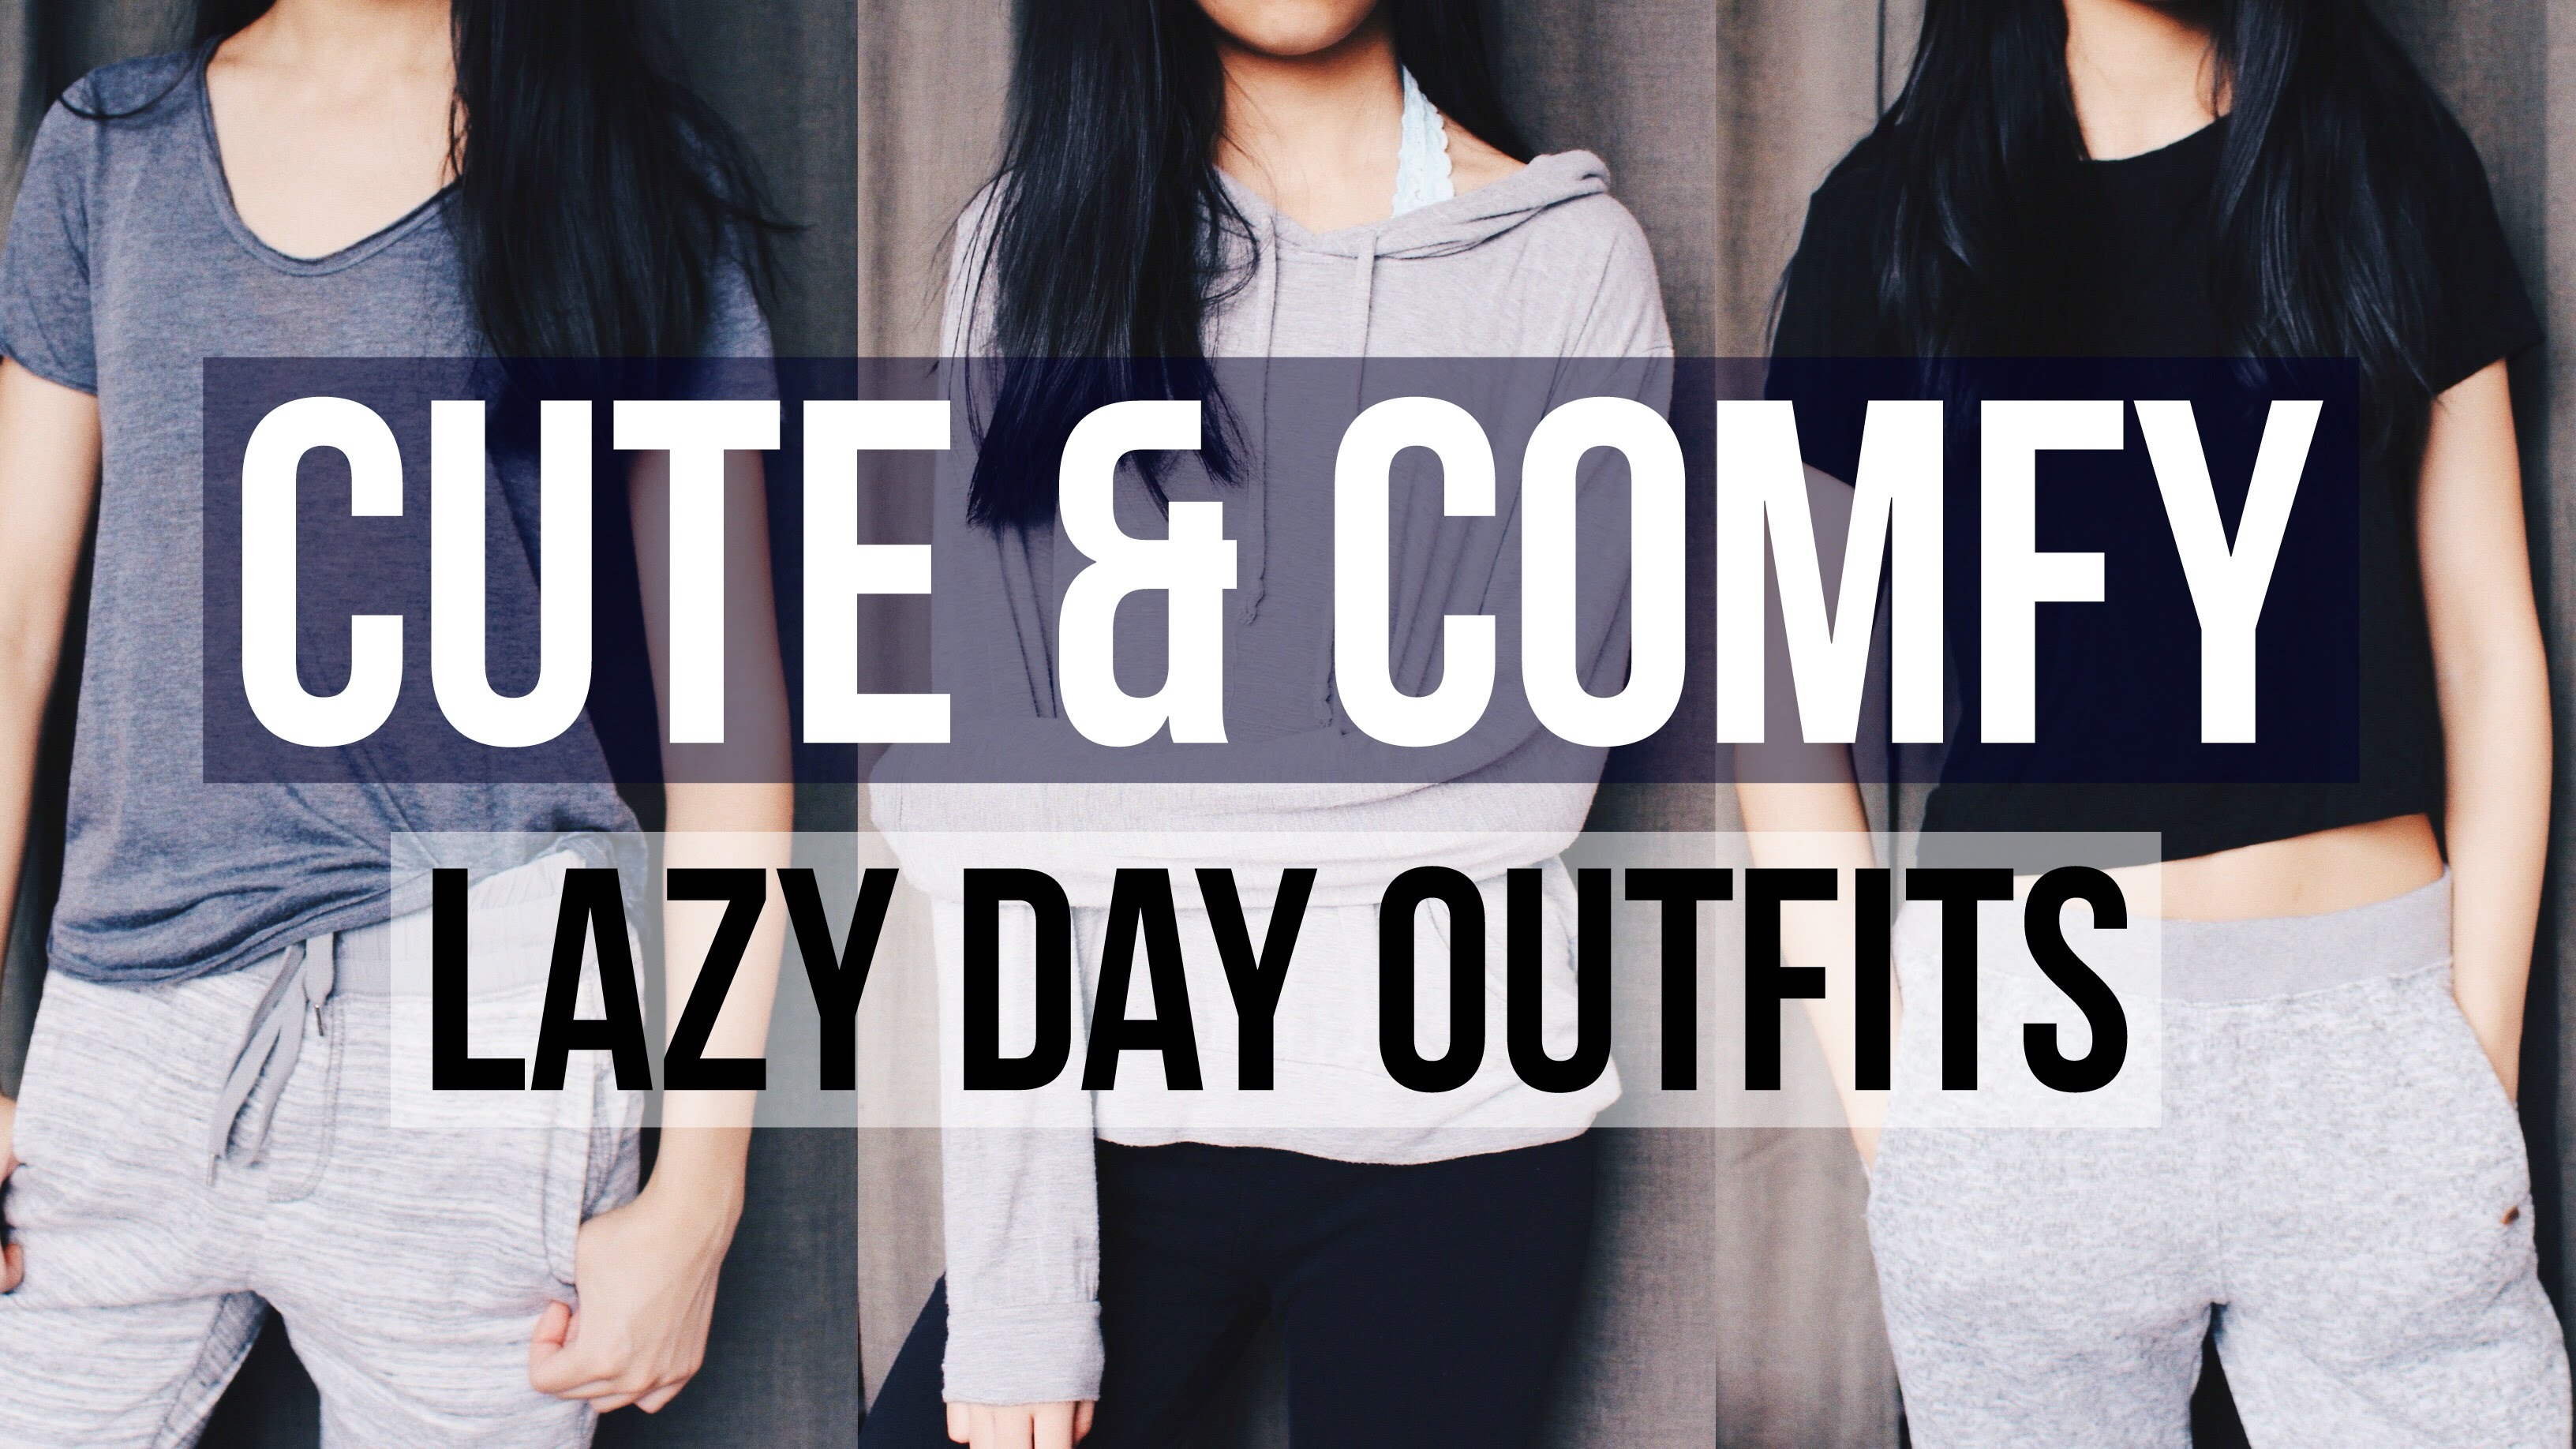 Cute & Comfy Lazy Day Outfits ♥ - YouTube